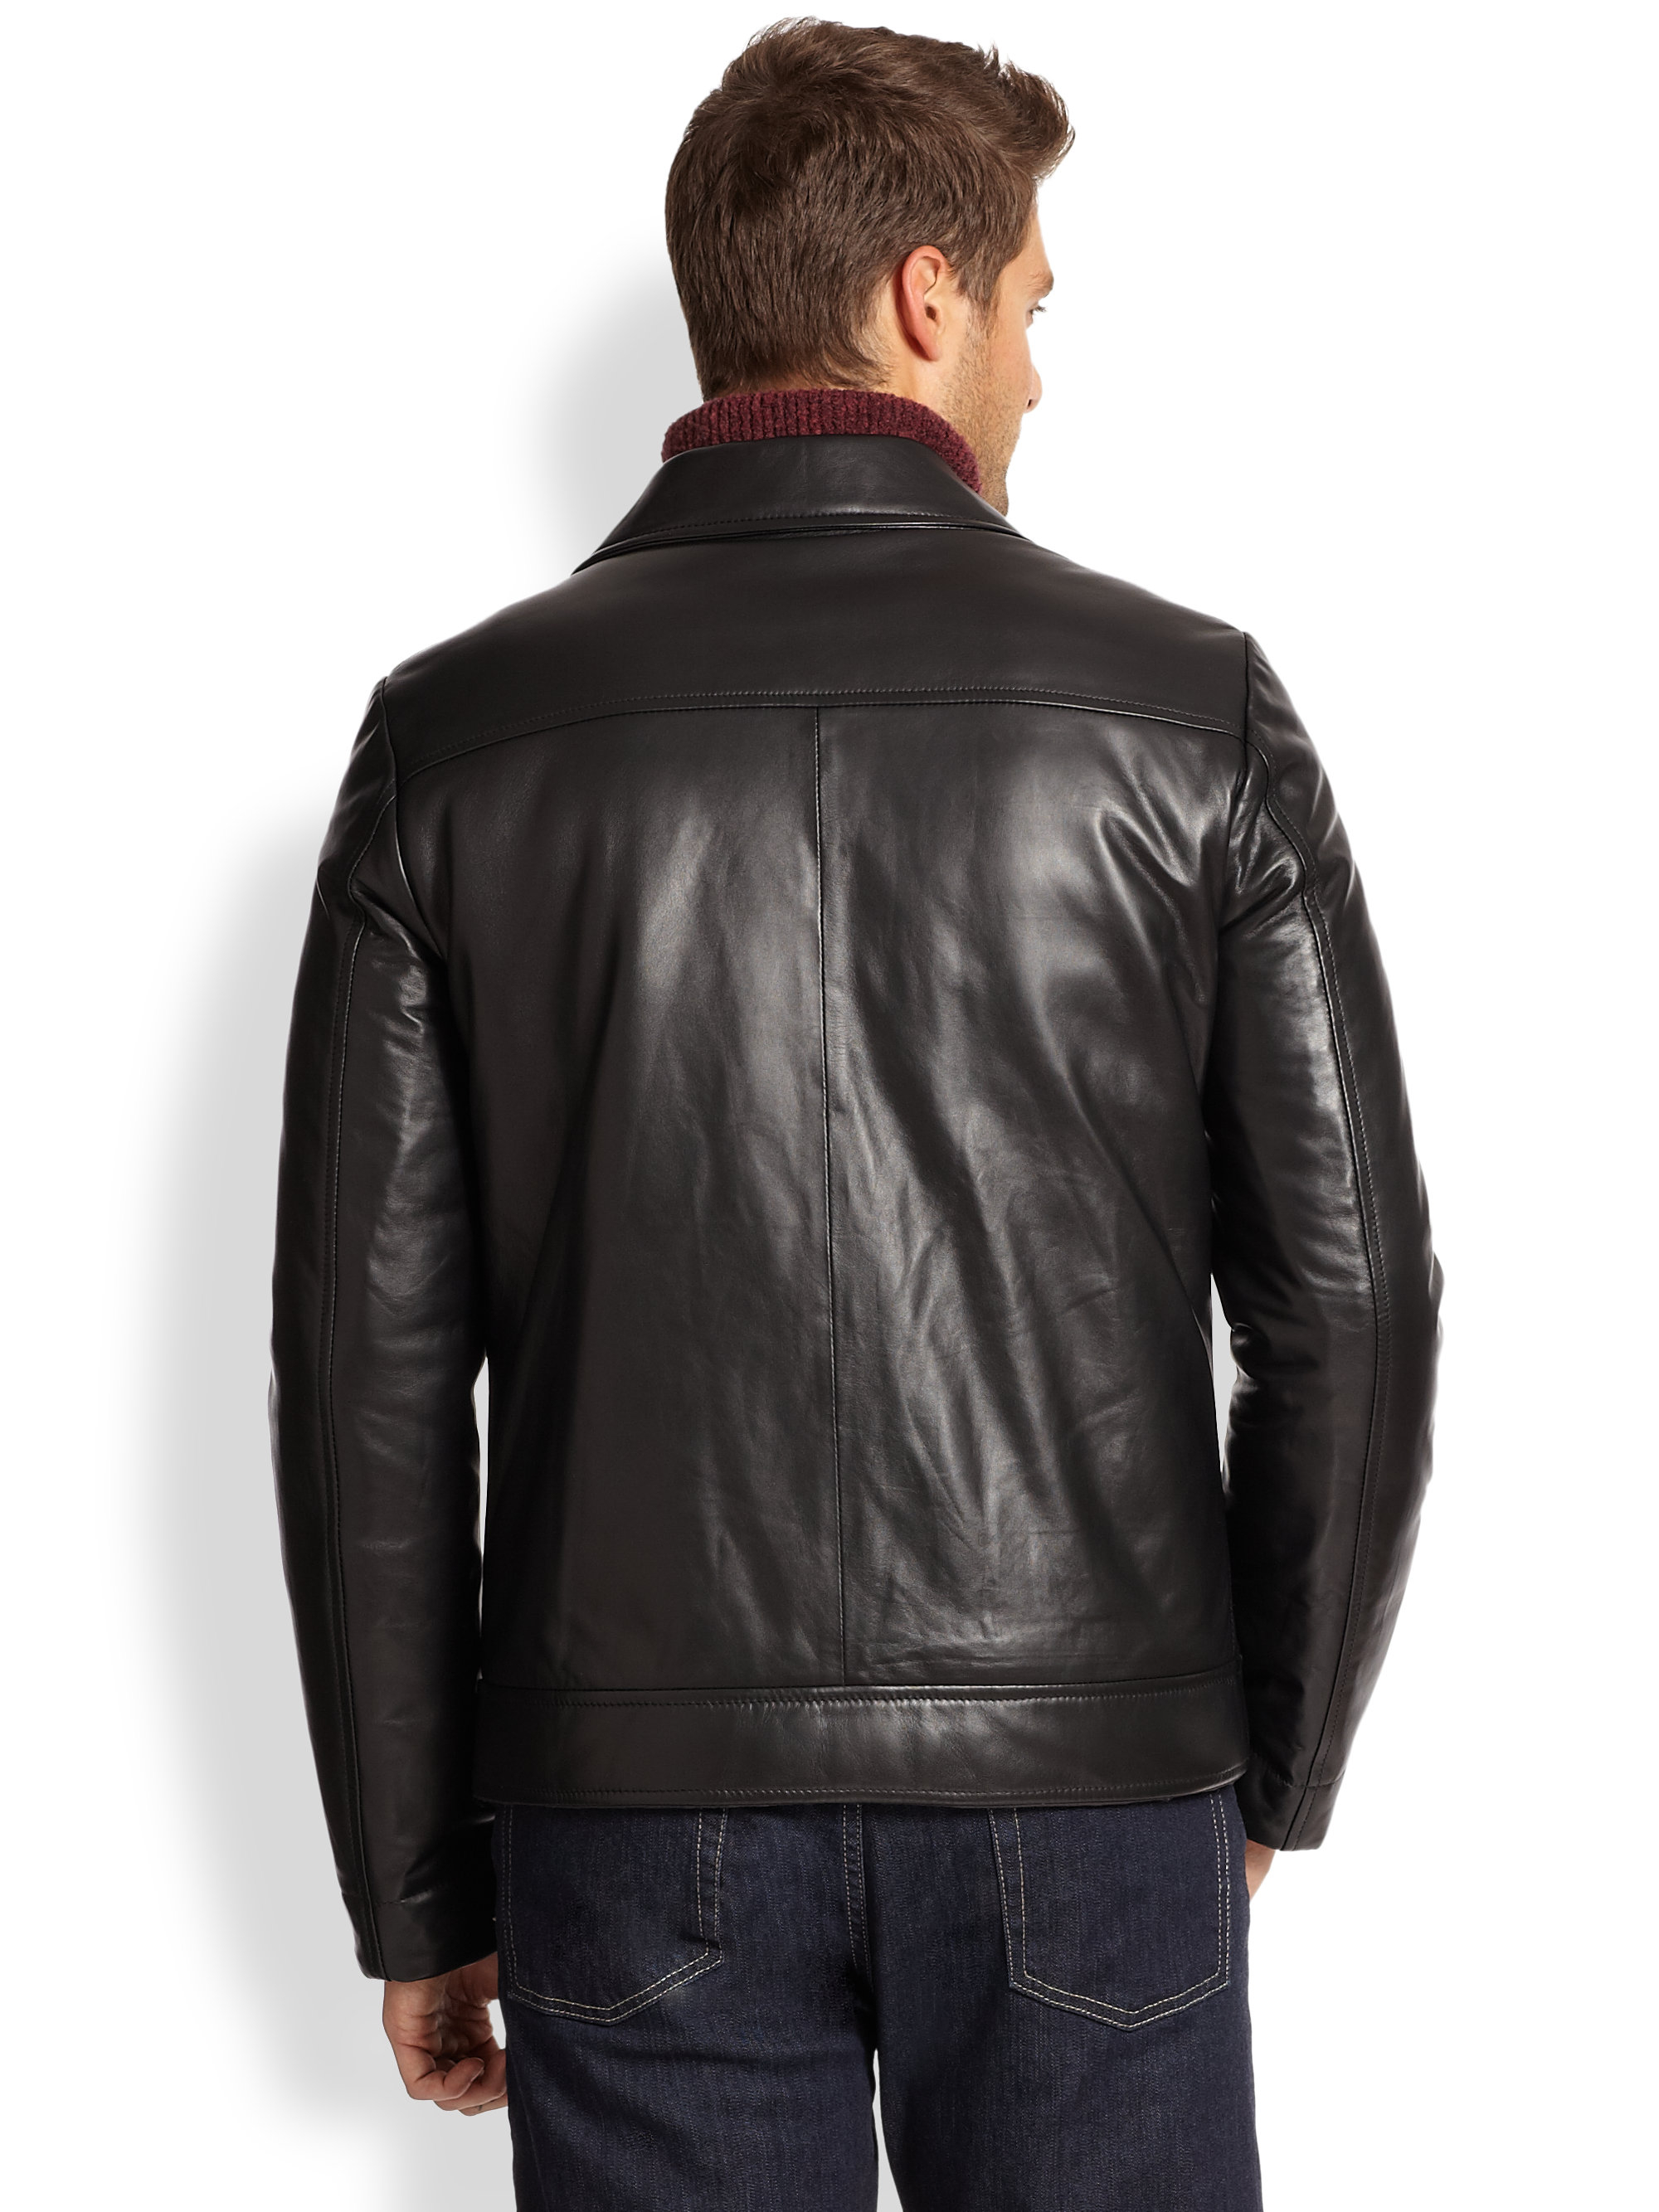 Canali Leather Jacket in Black for Men - Lyst